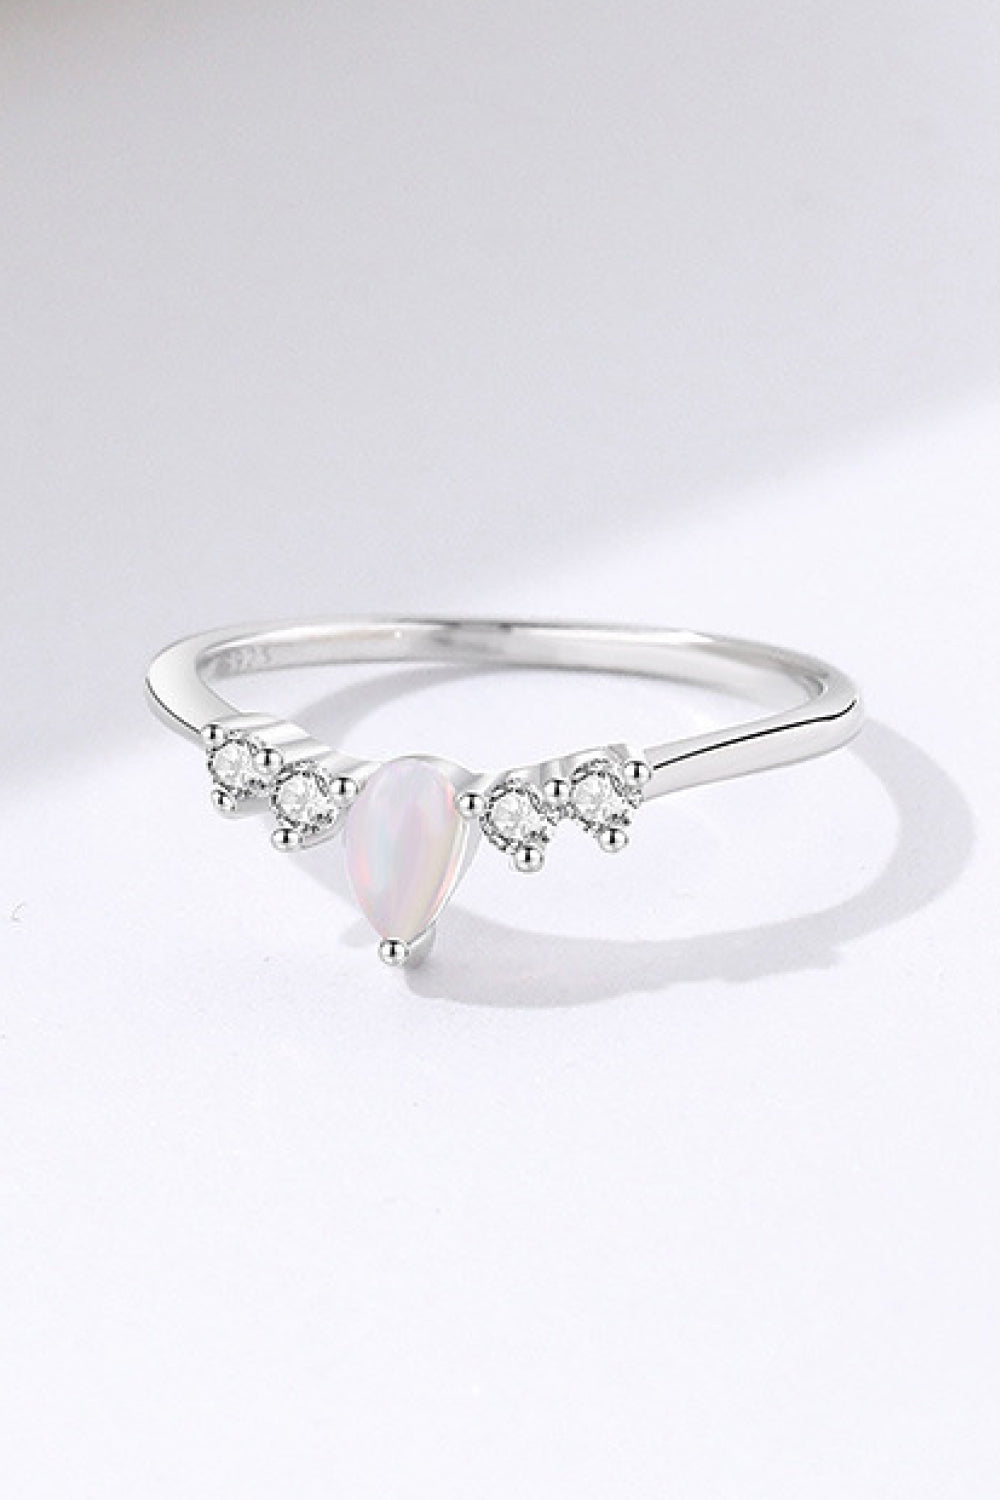 Lavender Pear Shape Opal Inlaid Zircon Ring Sentient Beauty Fashions Rings